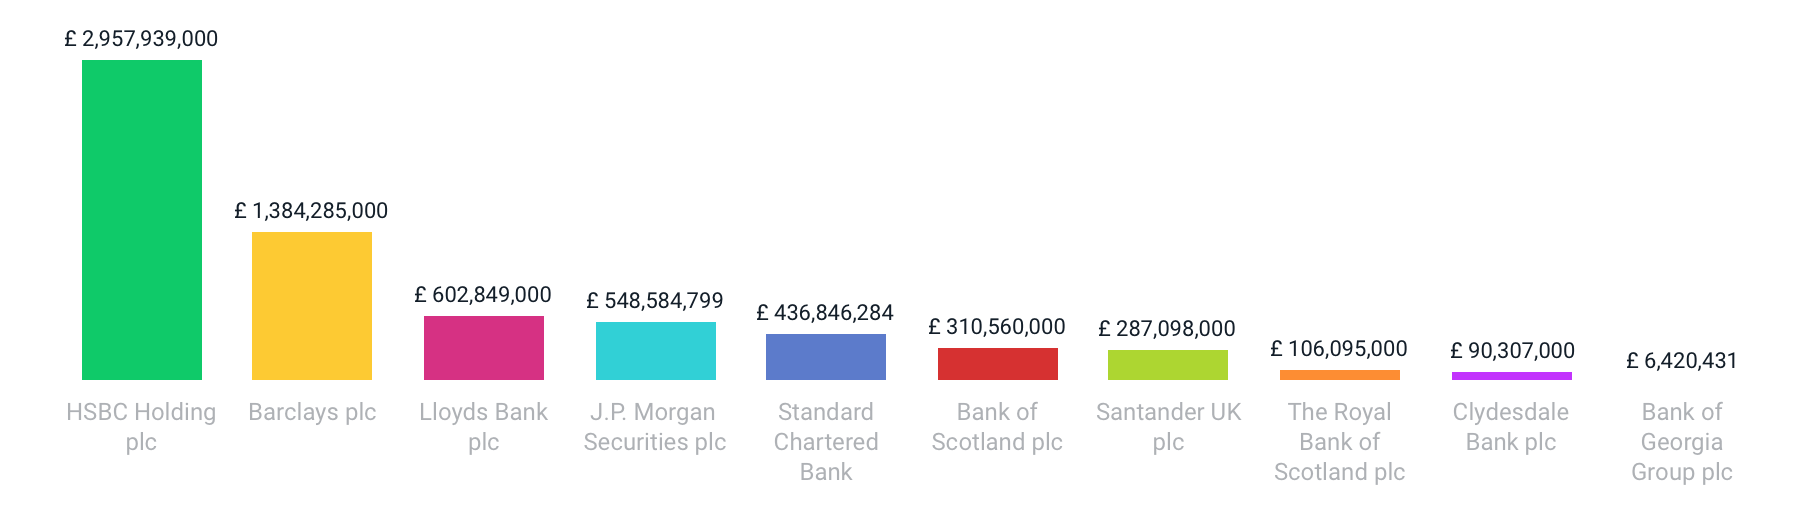 UK: Top 10 Banks & Banking Institutions by Assets in 2021